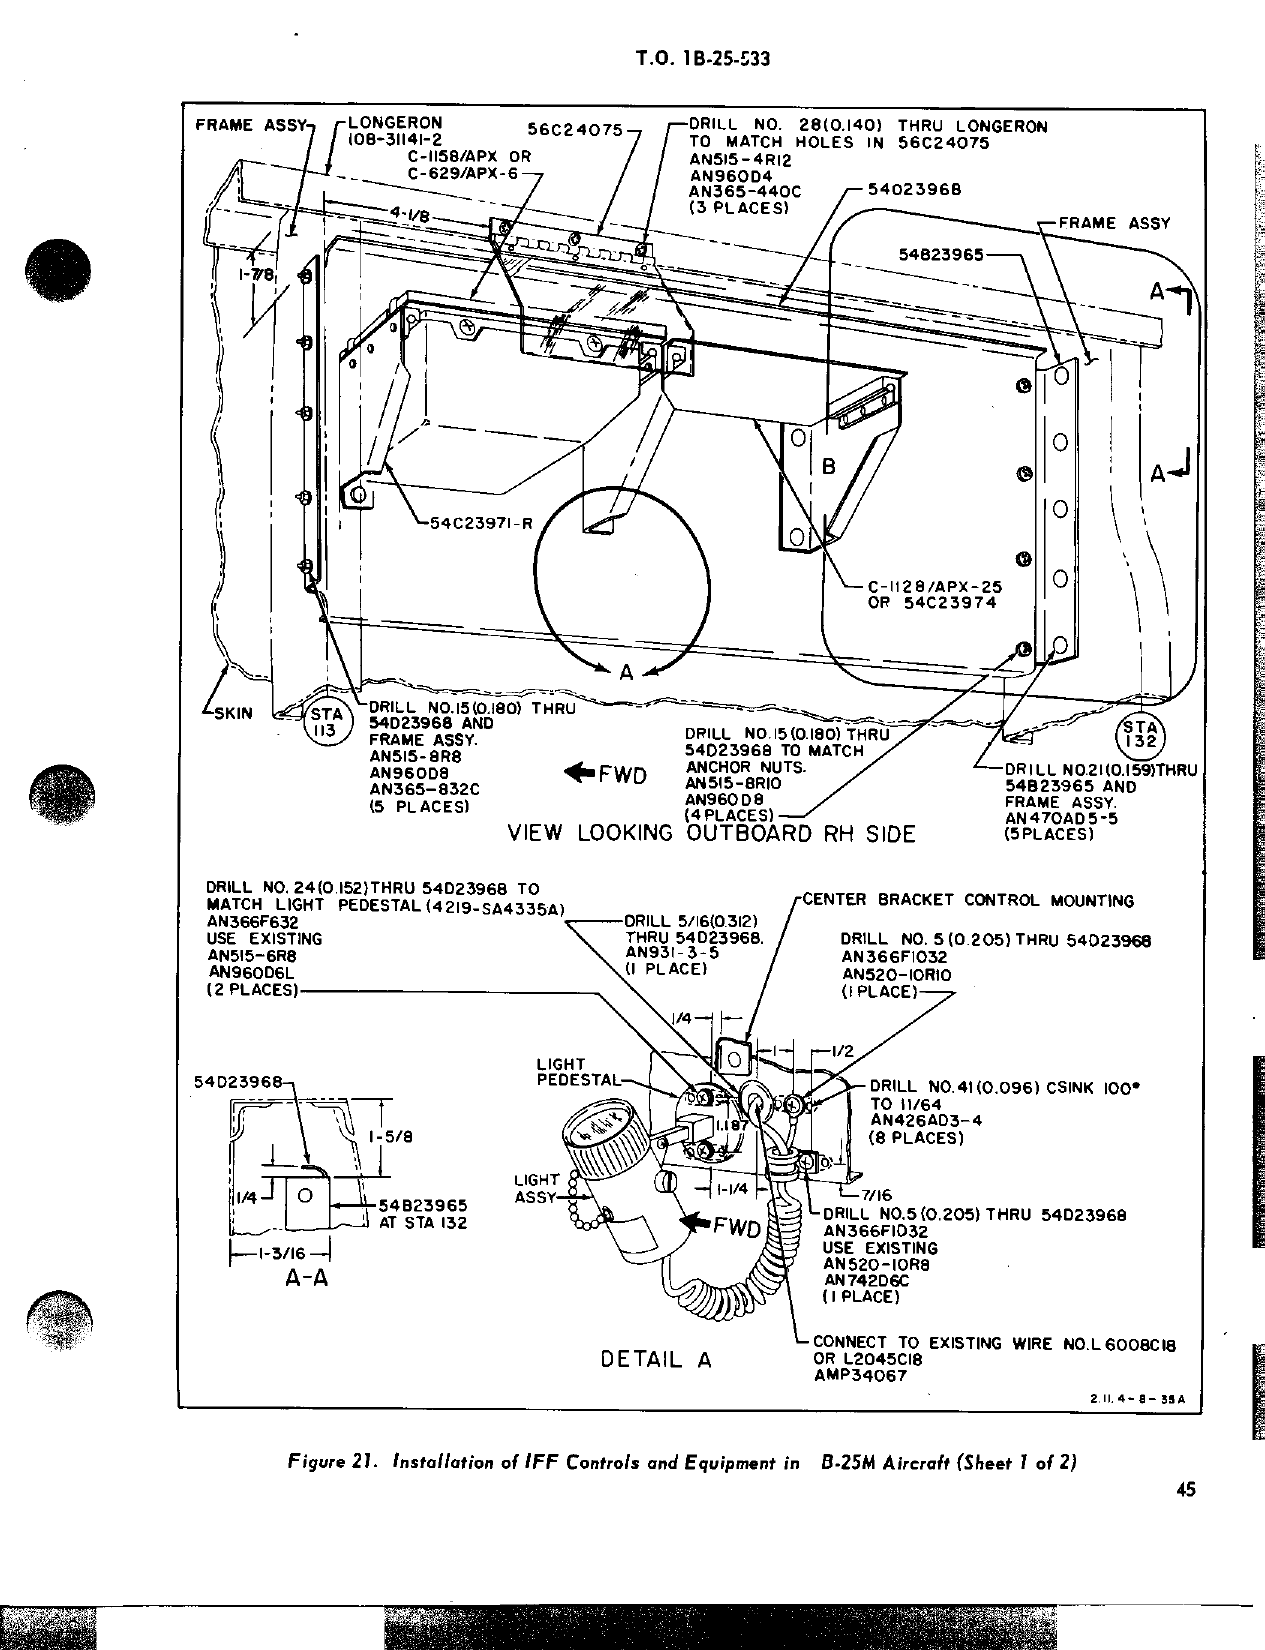 Sample page 655 from AirCorps Library document: Technical Orders - B-25 - Part 1